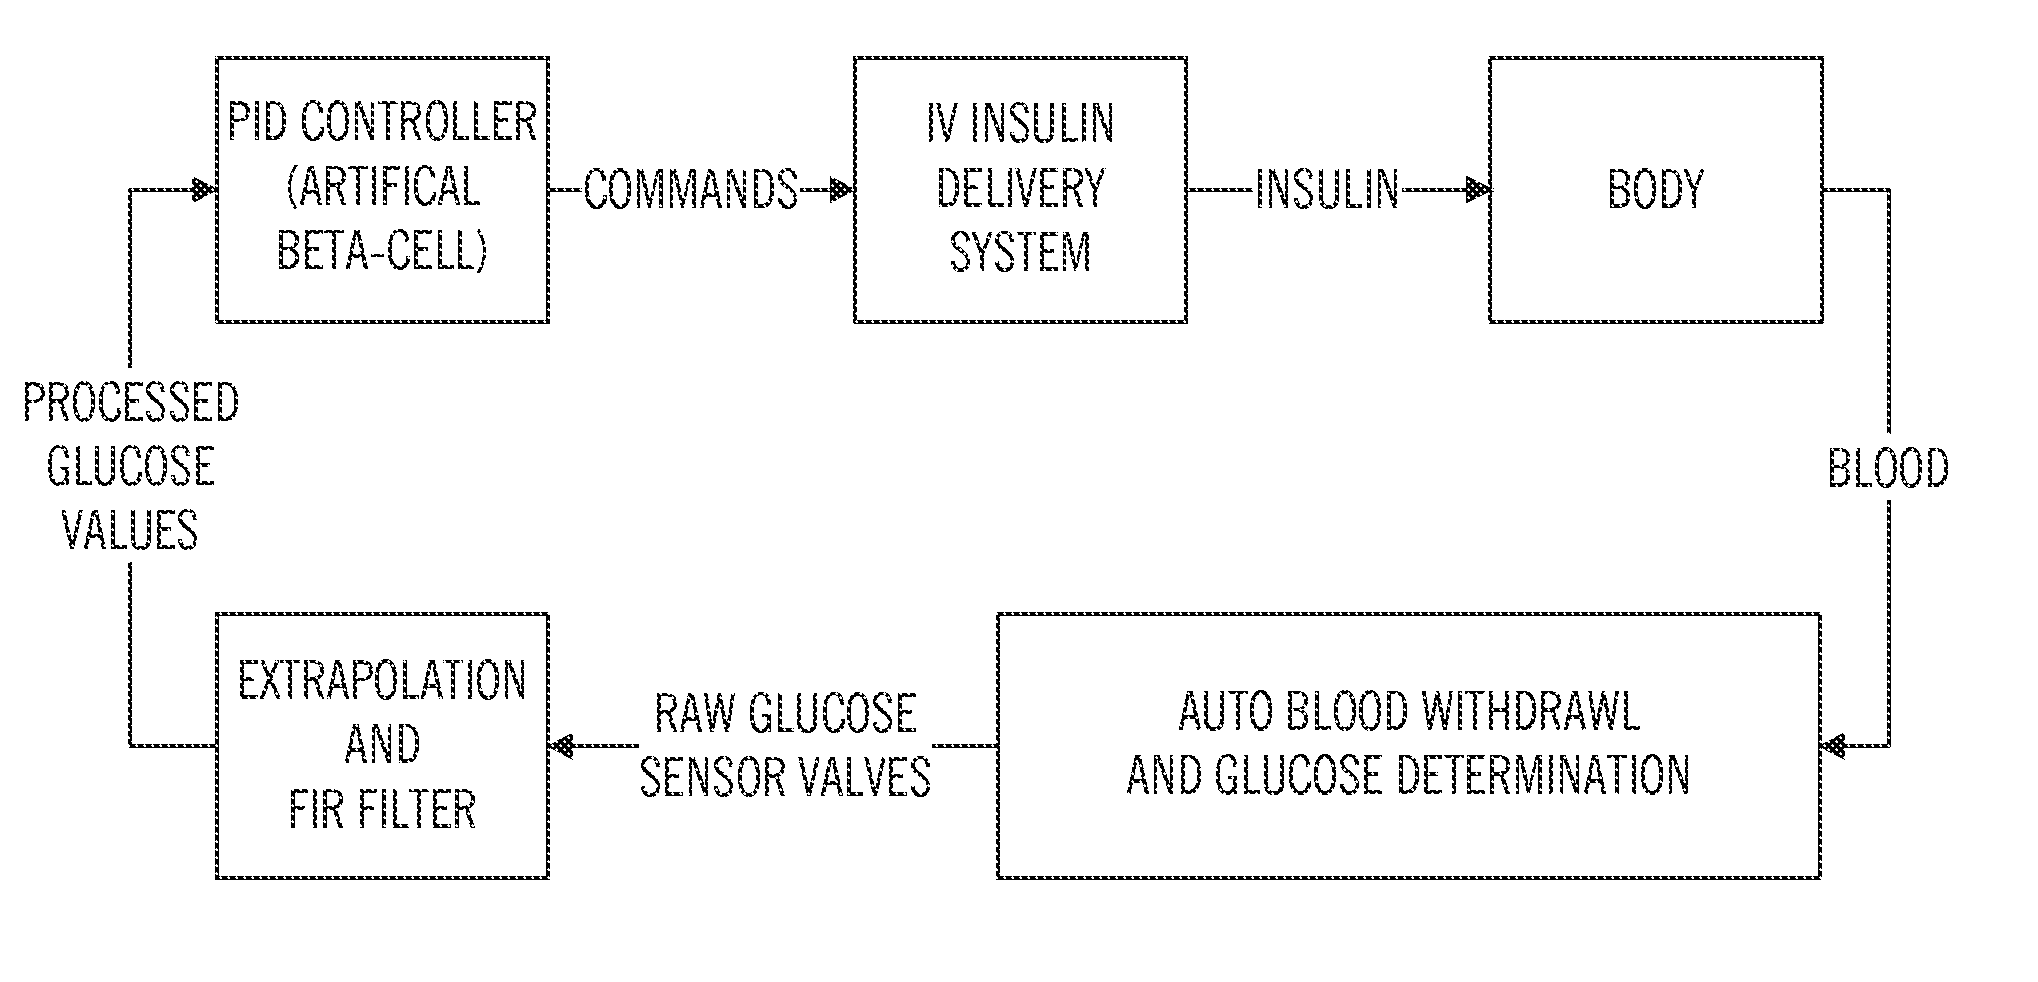 Generation of target glucose values for a closed-loop operating mode of an insulin infusion system